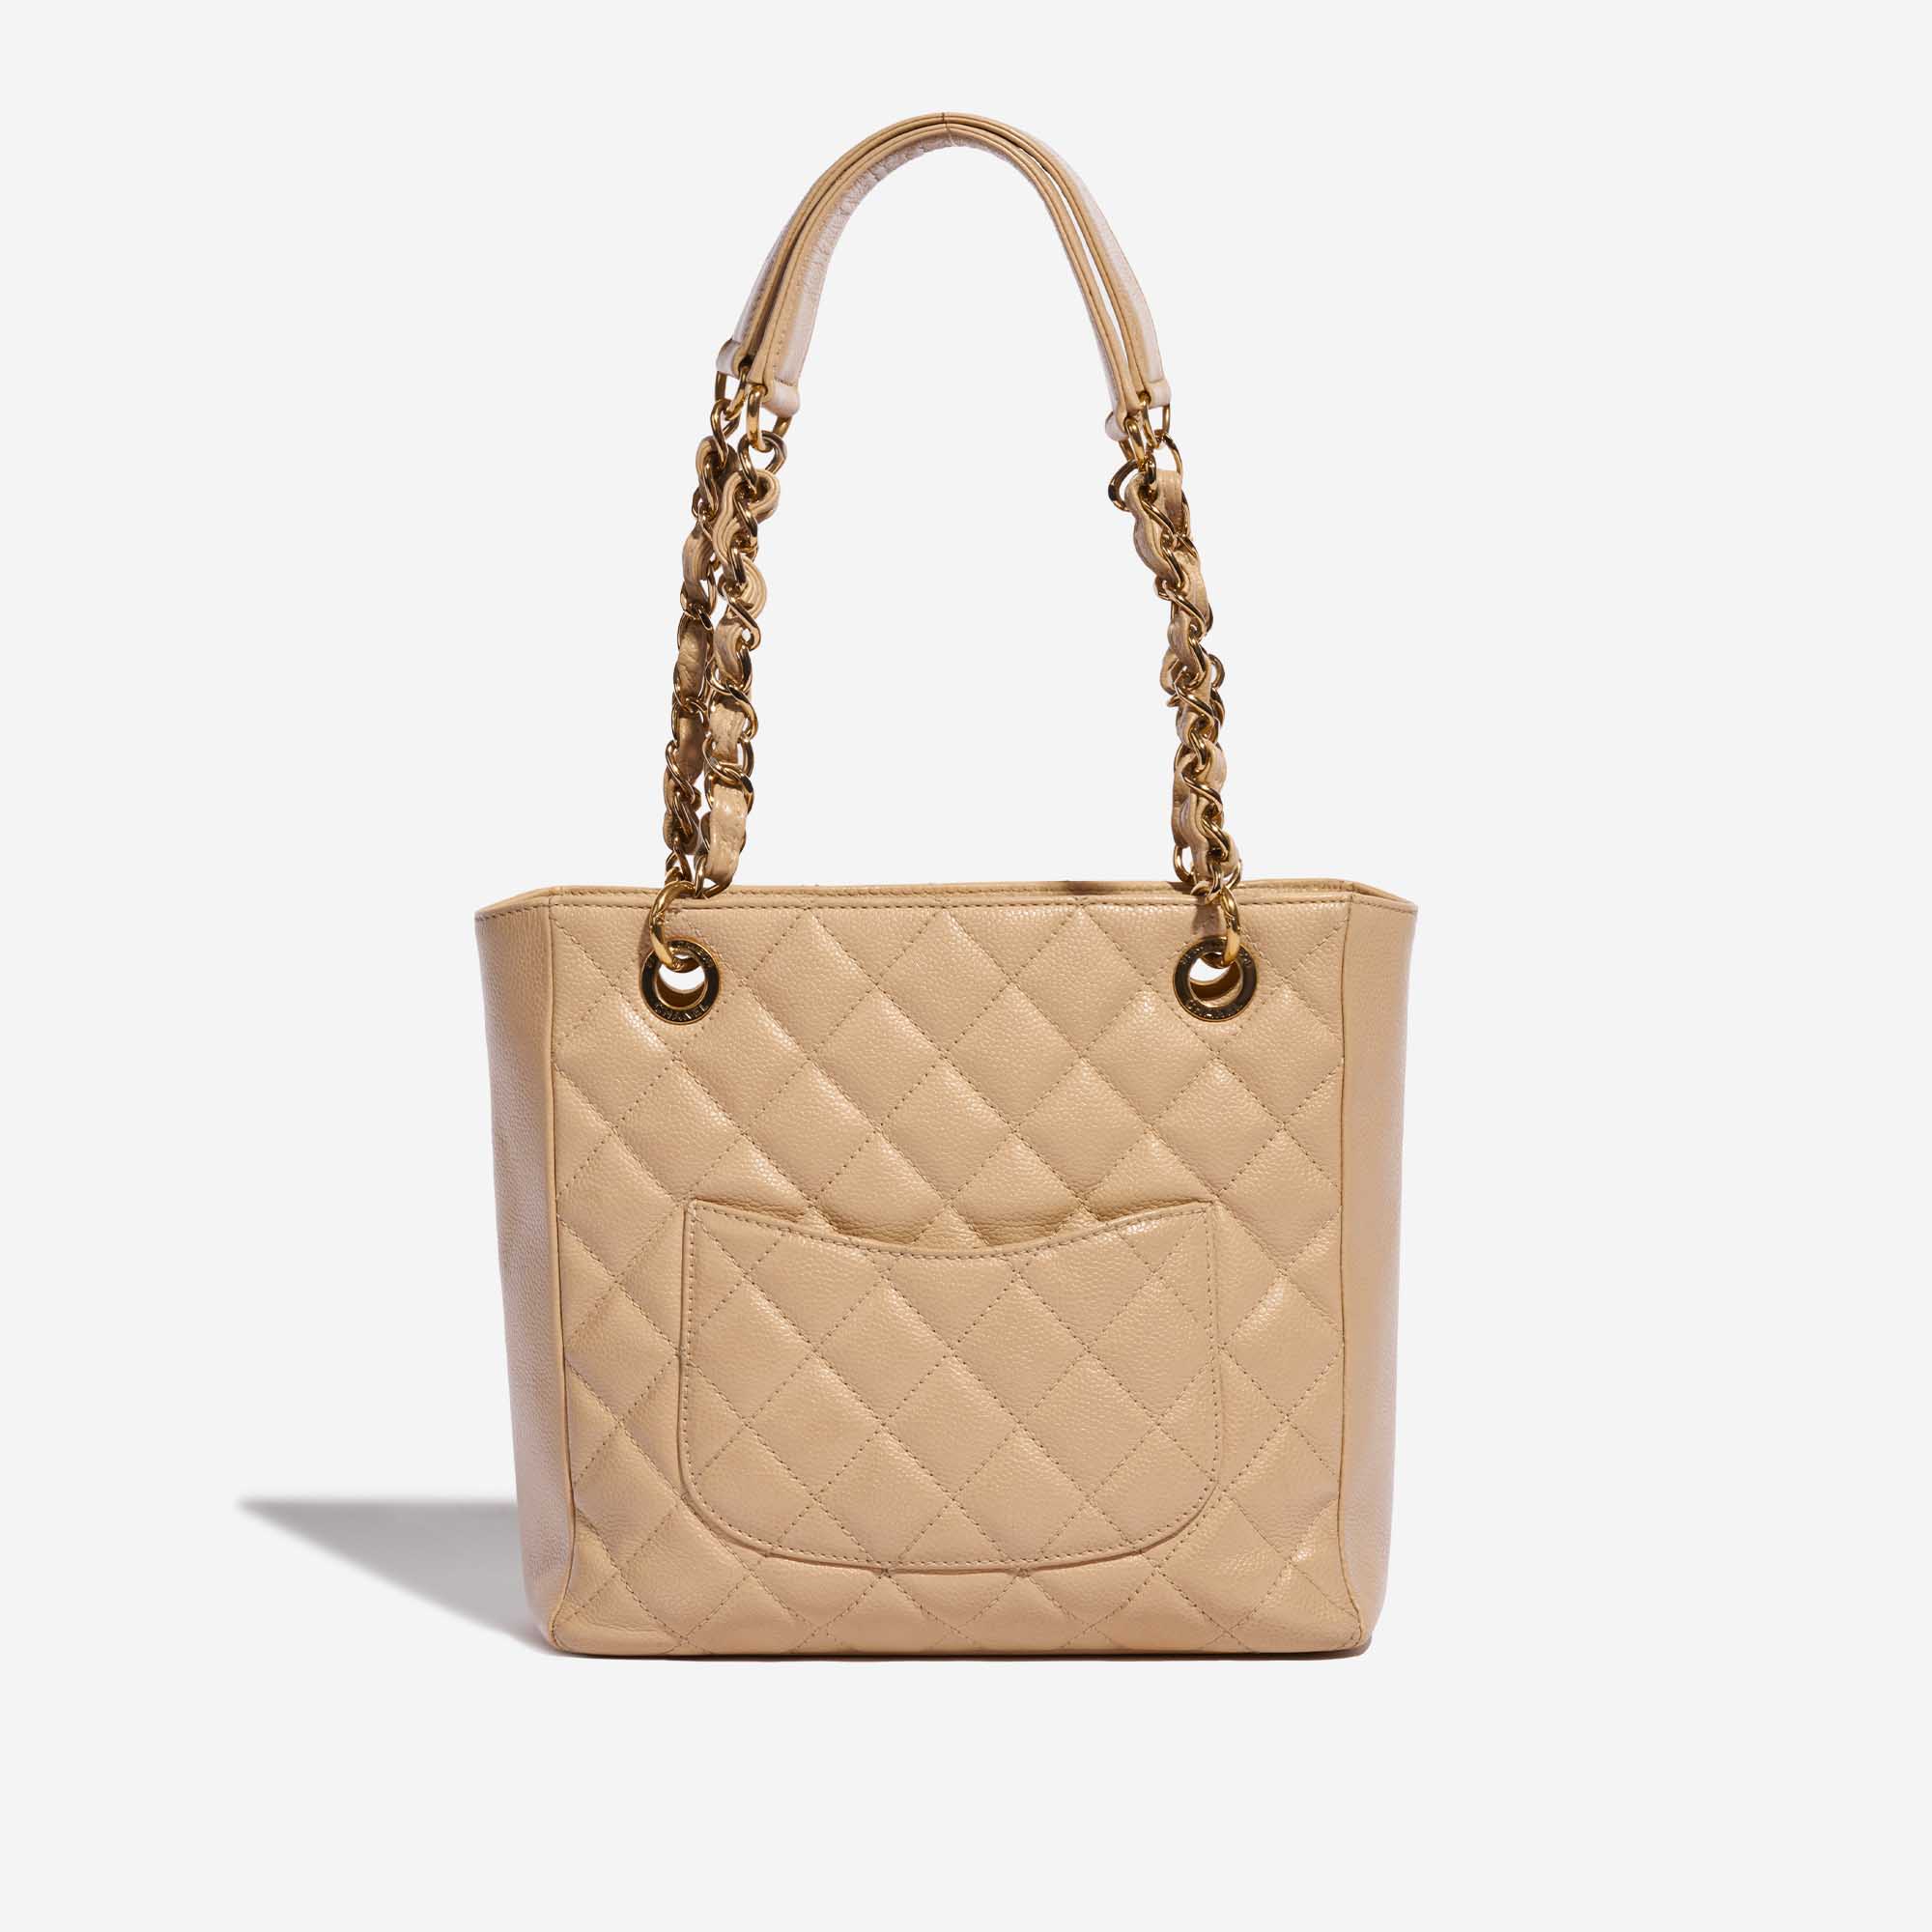 Pre-owned Chanel bag Shopping Tote PST Caviar Beige Beige Back | Sell your designer bag on Saclab.com